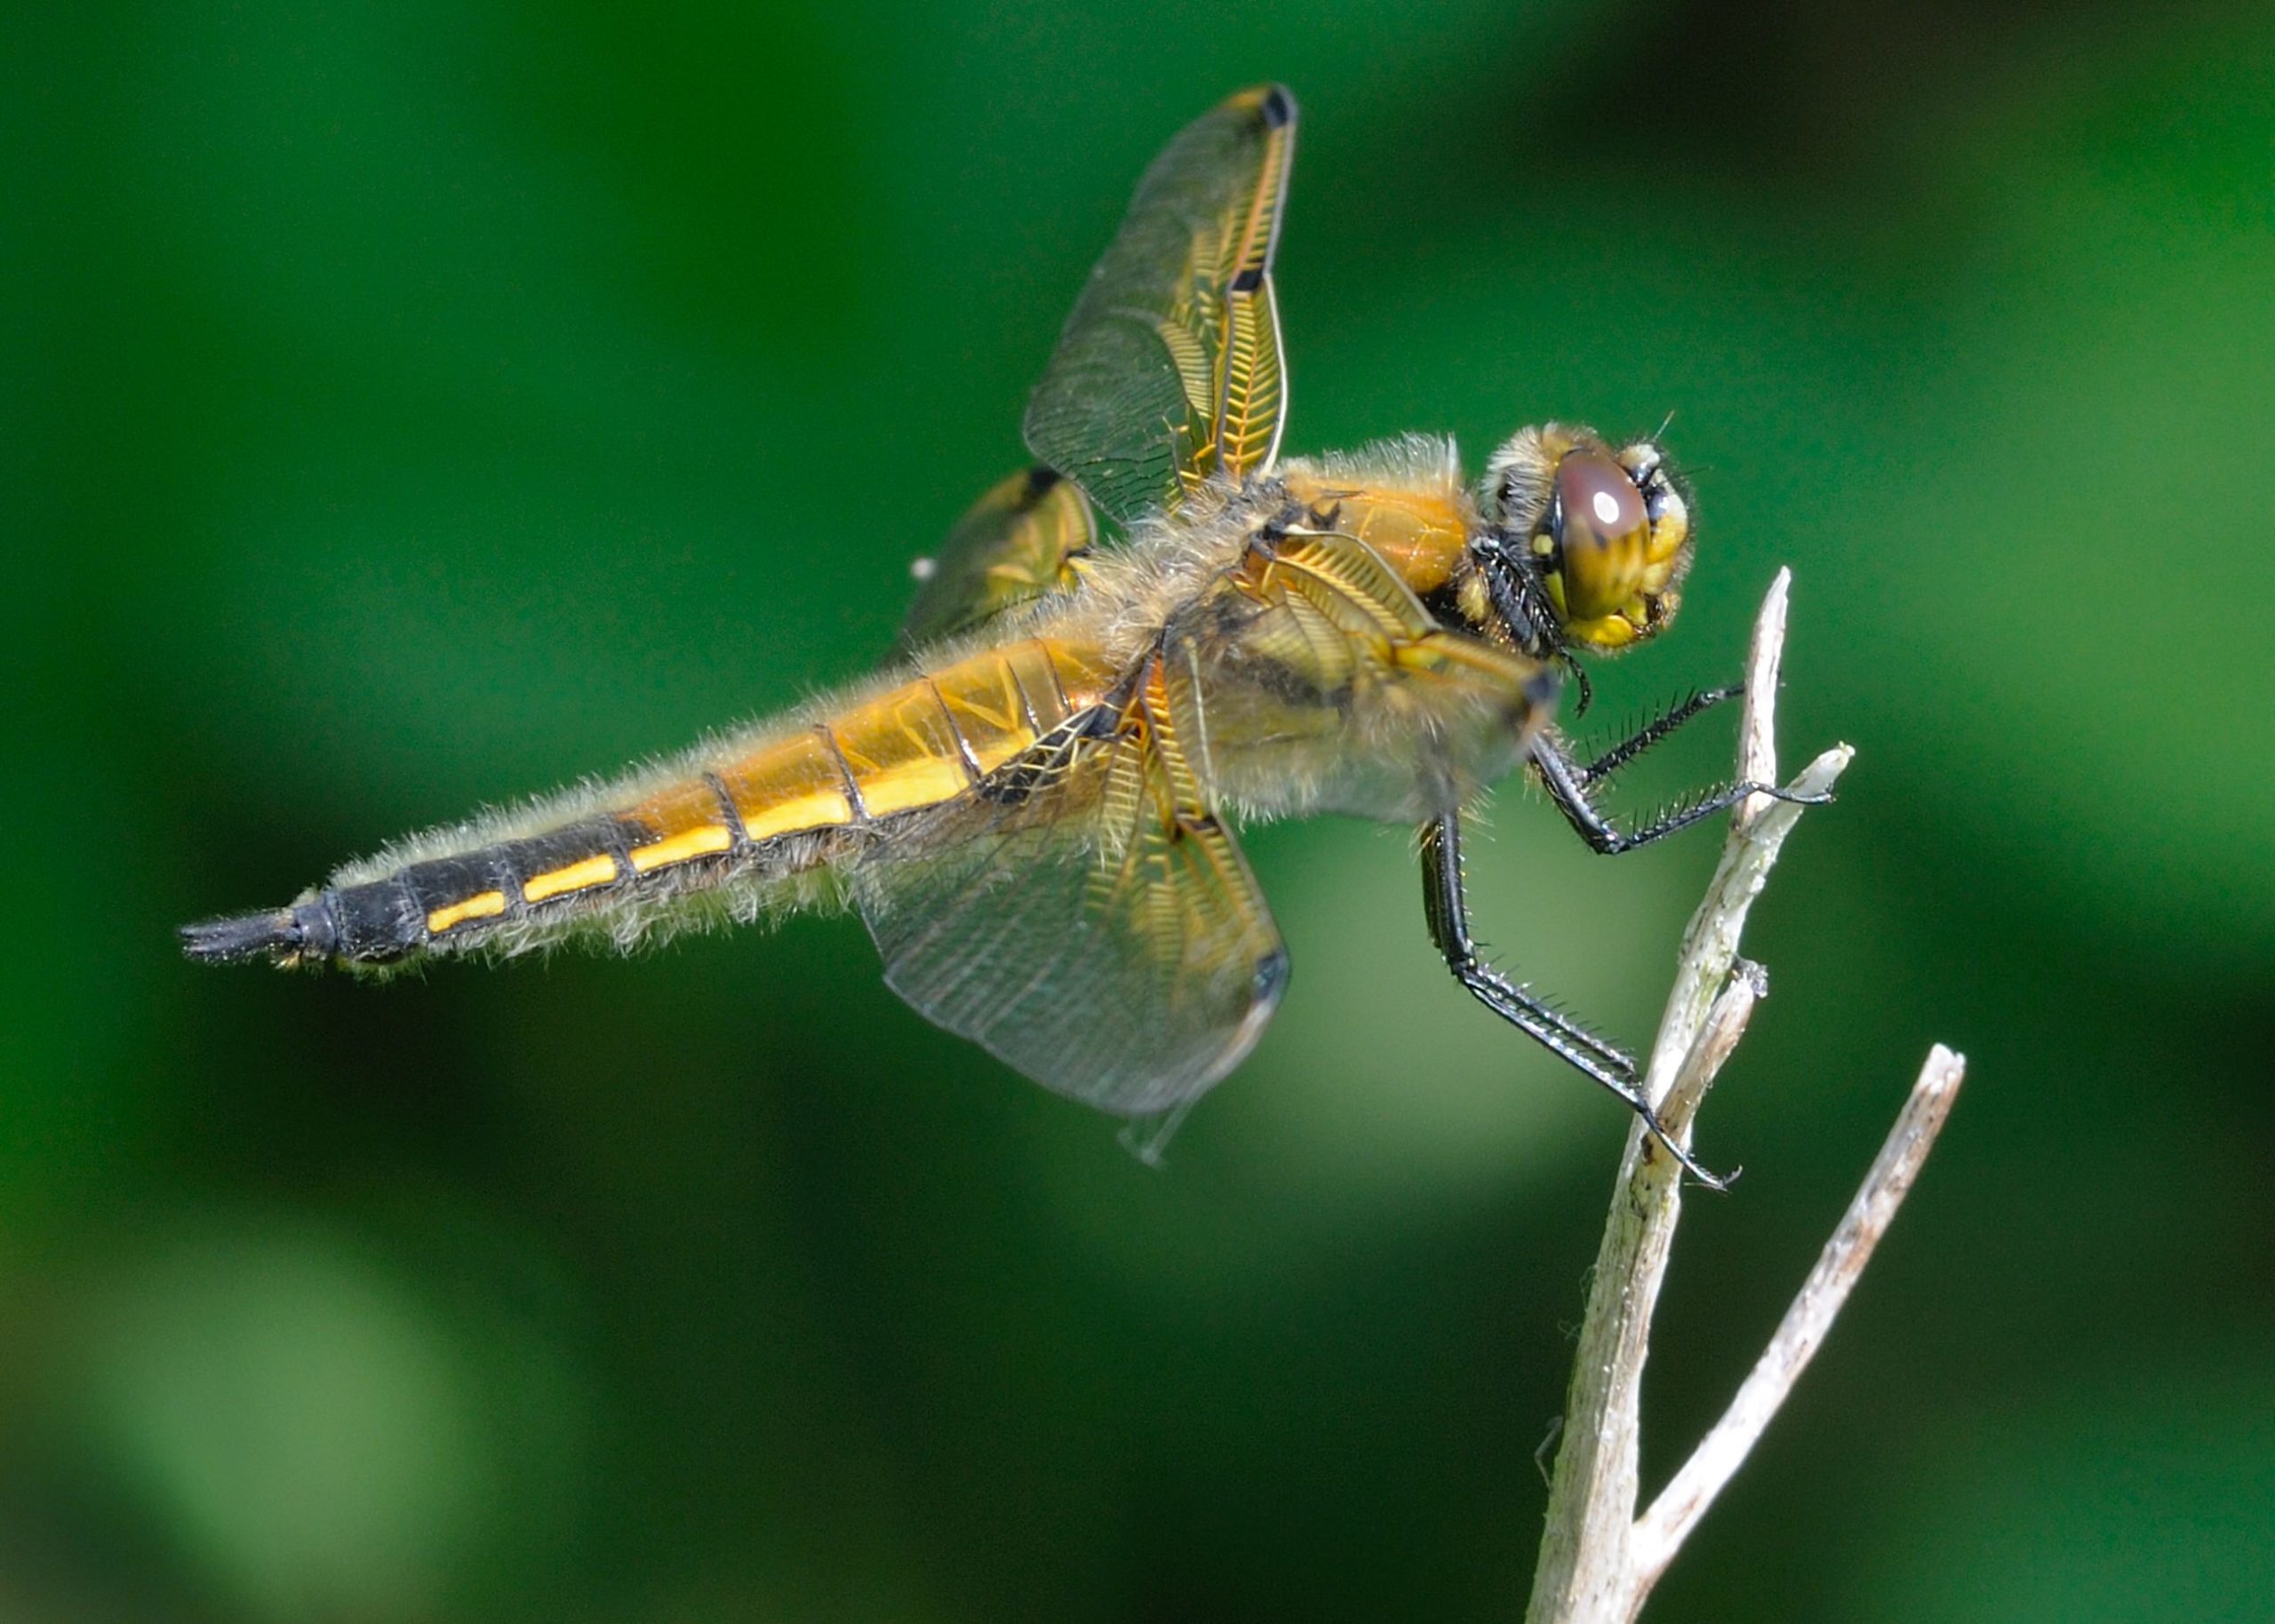 Four-spotted chaser dragonfly, Libellula quadrimaculata, perching